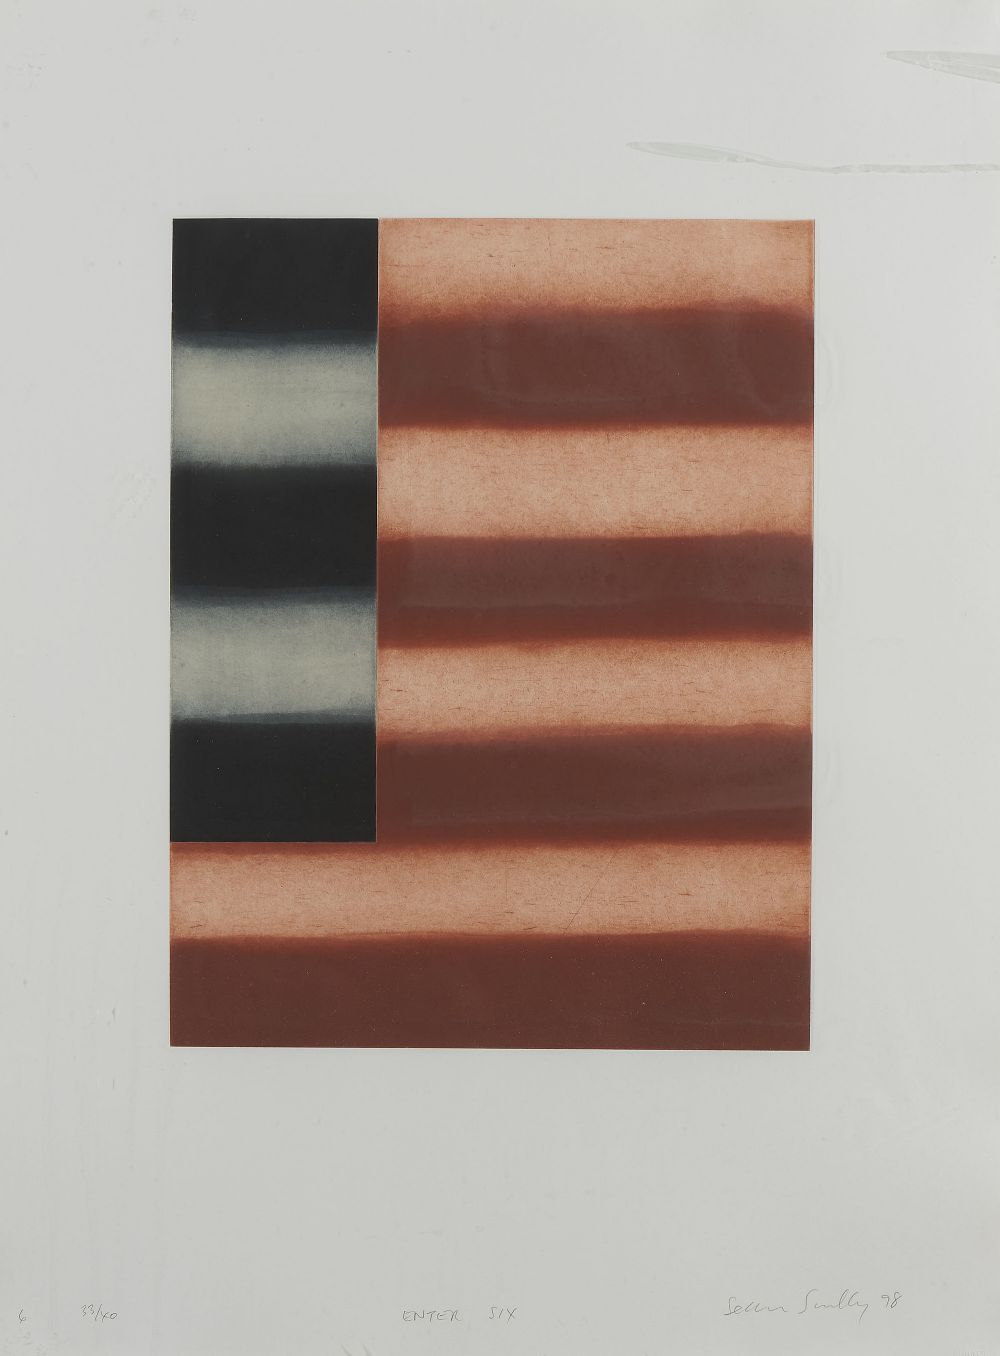 Lot 68 - ENTER SIX (No. 12) by Sean Scully